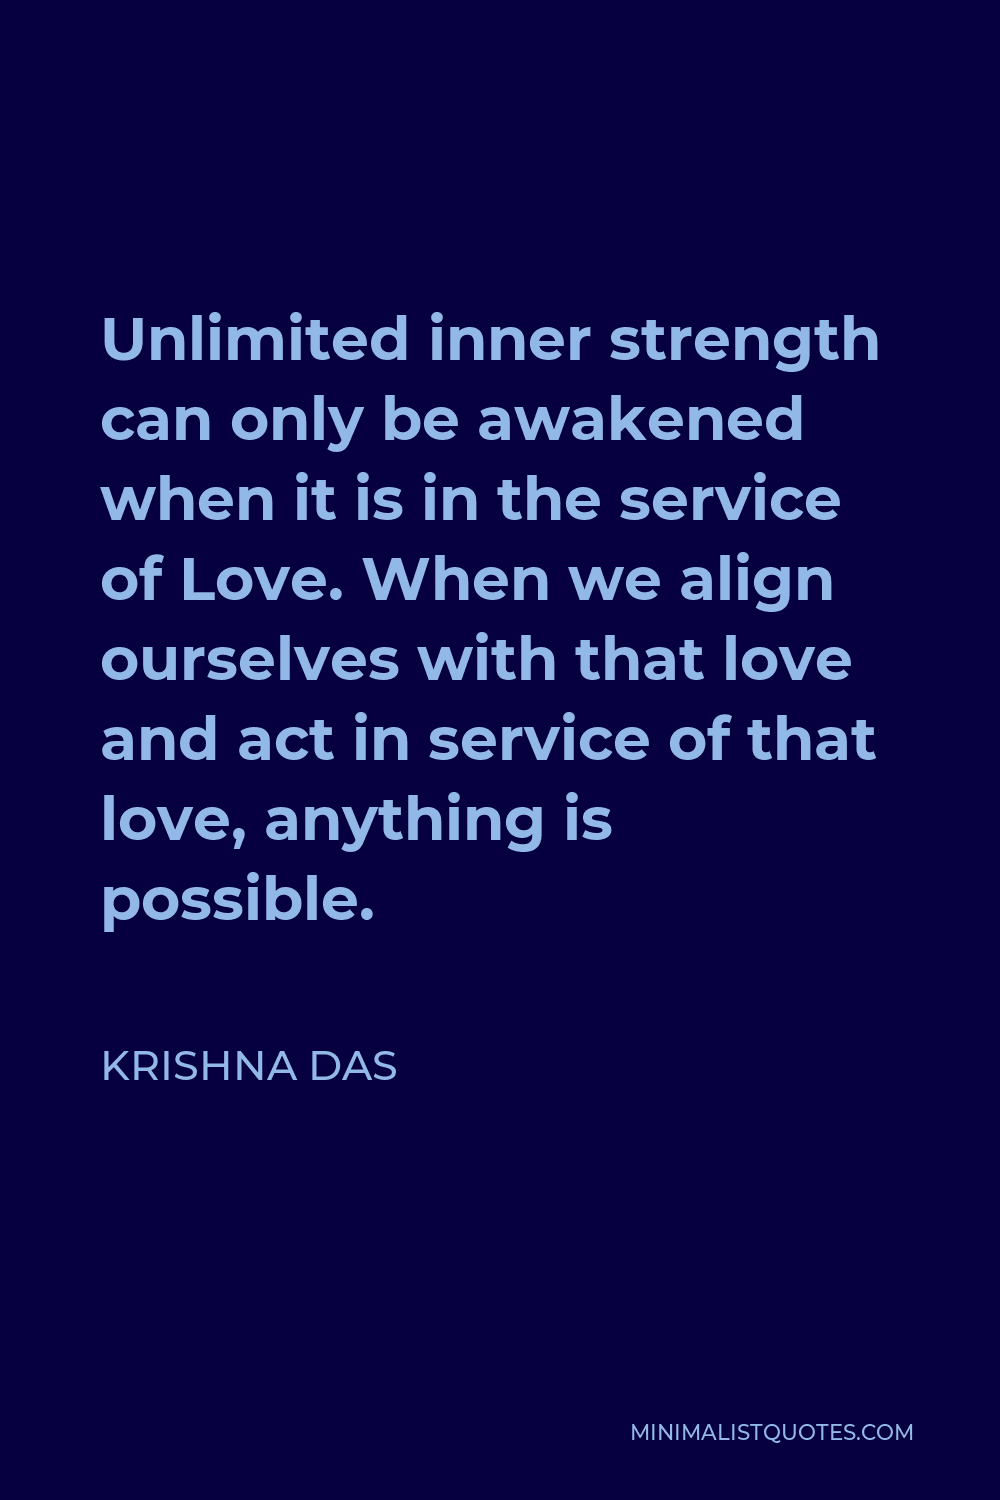 Krishna Das Quote - Unlimited inner strength can only be awakened when it is in the service of Love. When we align ourselves with that love and act in service of that love, anything is possible.